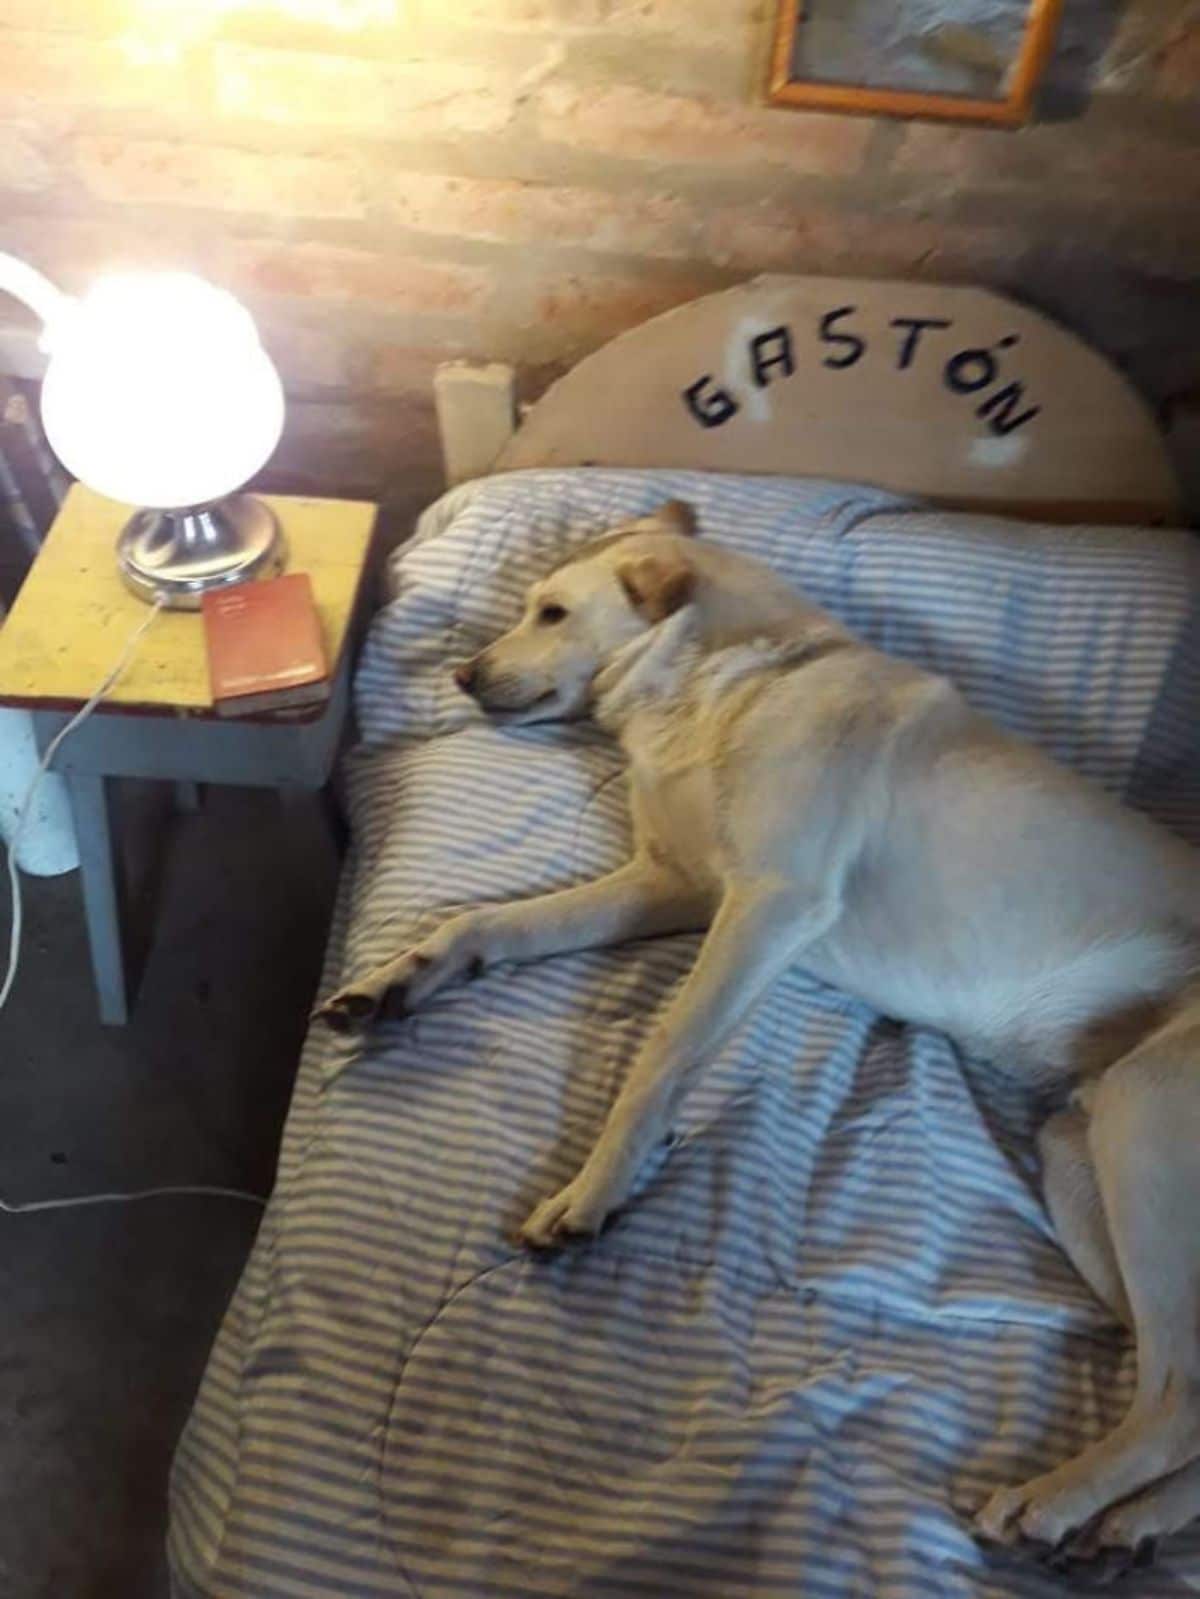 white dog sleeping on its own bed with its own night lamp